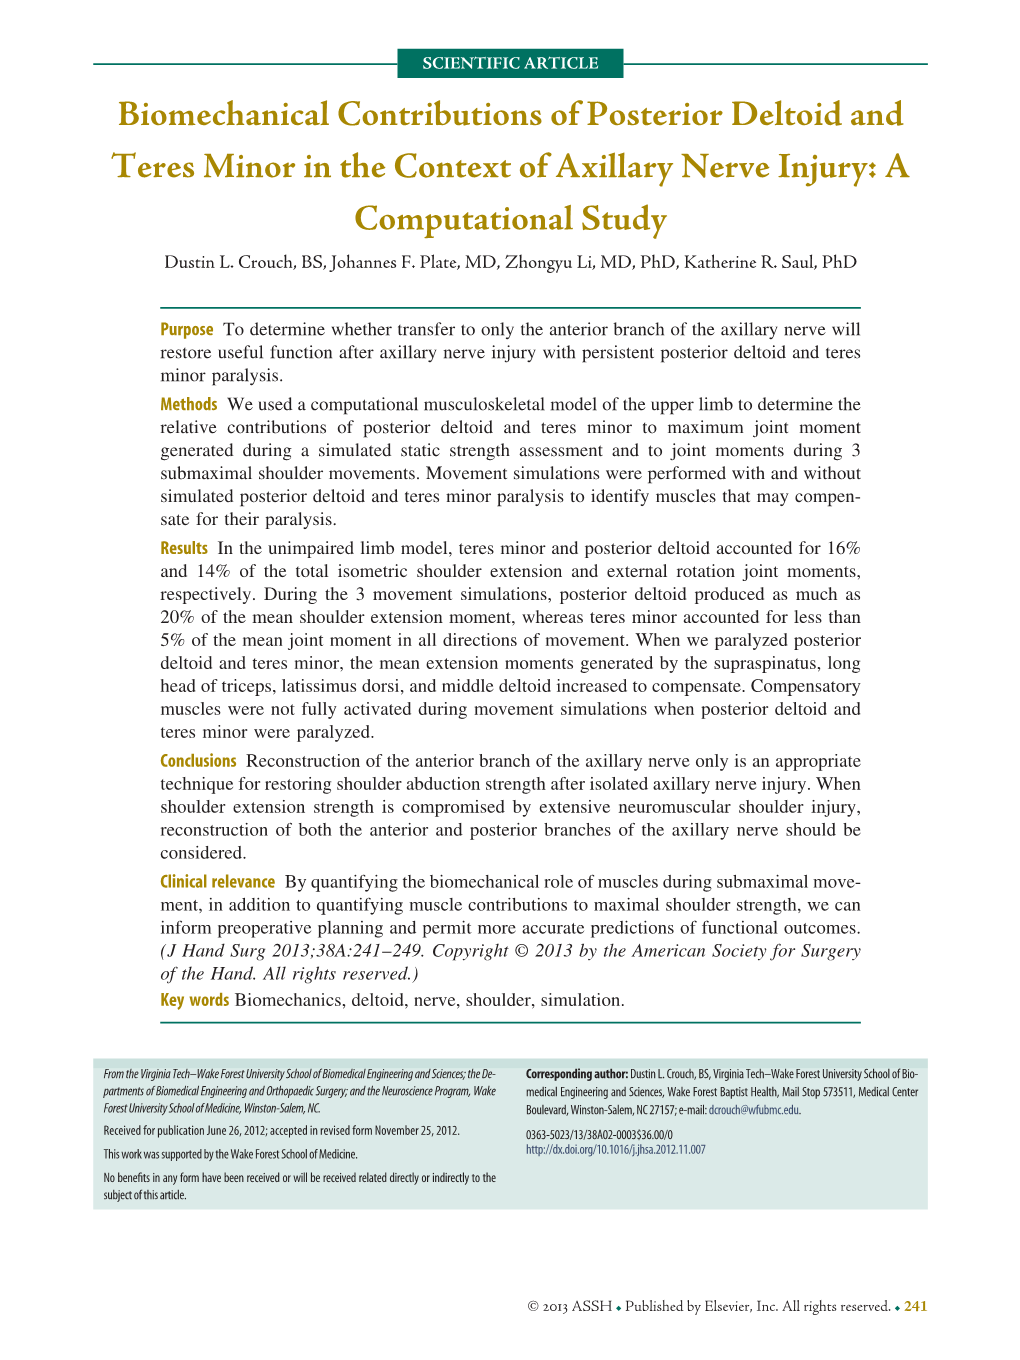 Biomechanical Contributions of Posterior Deltoid and Teres Minor in the Context of Axillary Nerve Injury: a Computational Study Dustin L